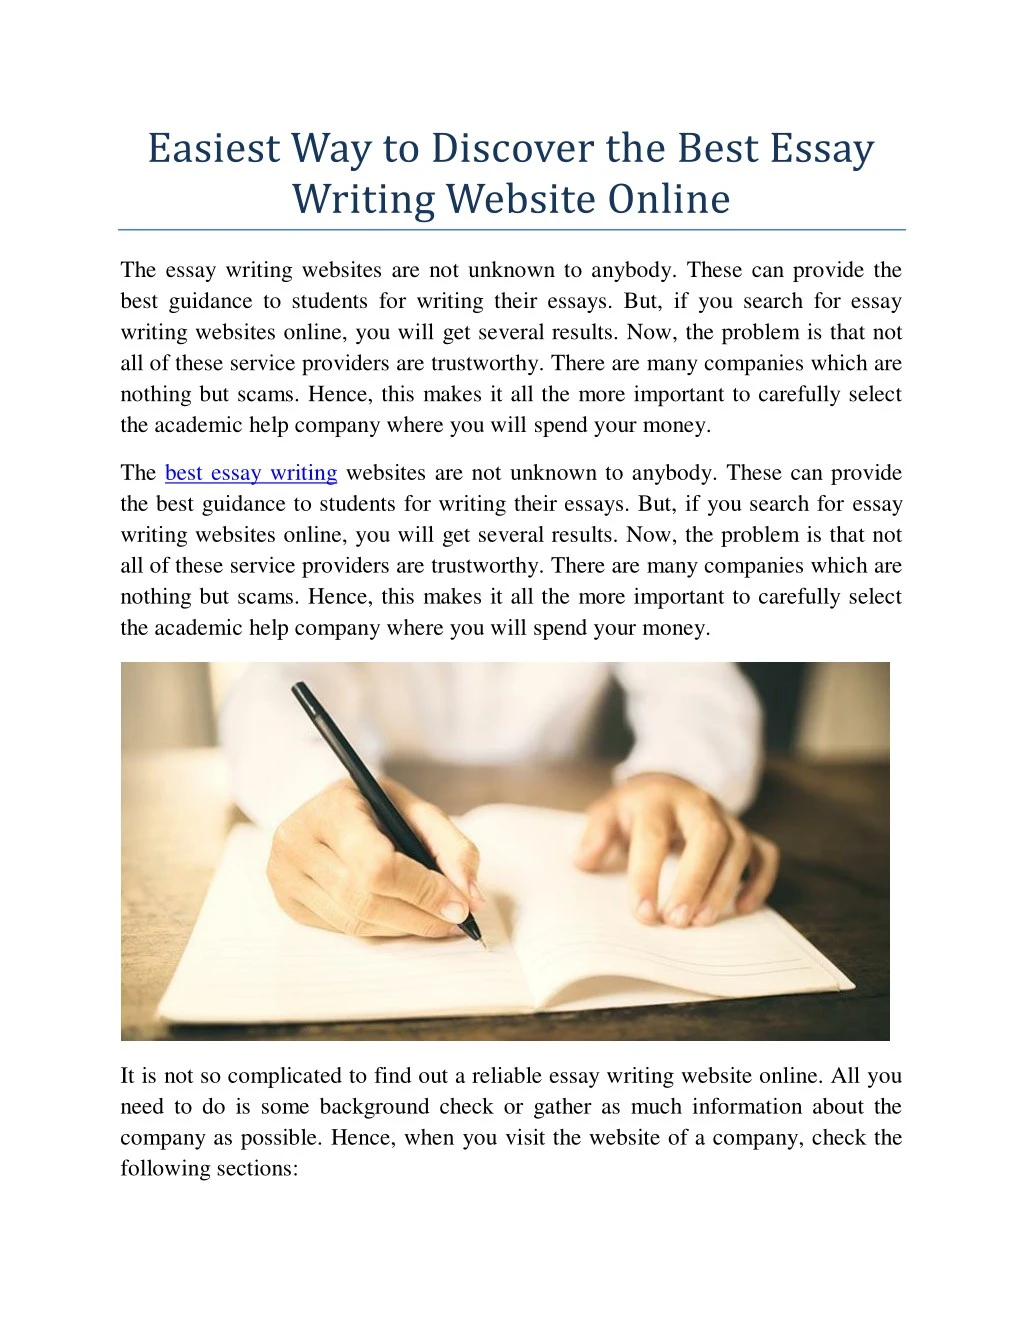 easiest way to discover the best essay writing